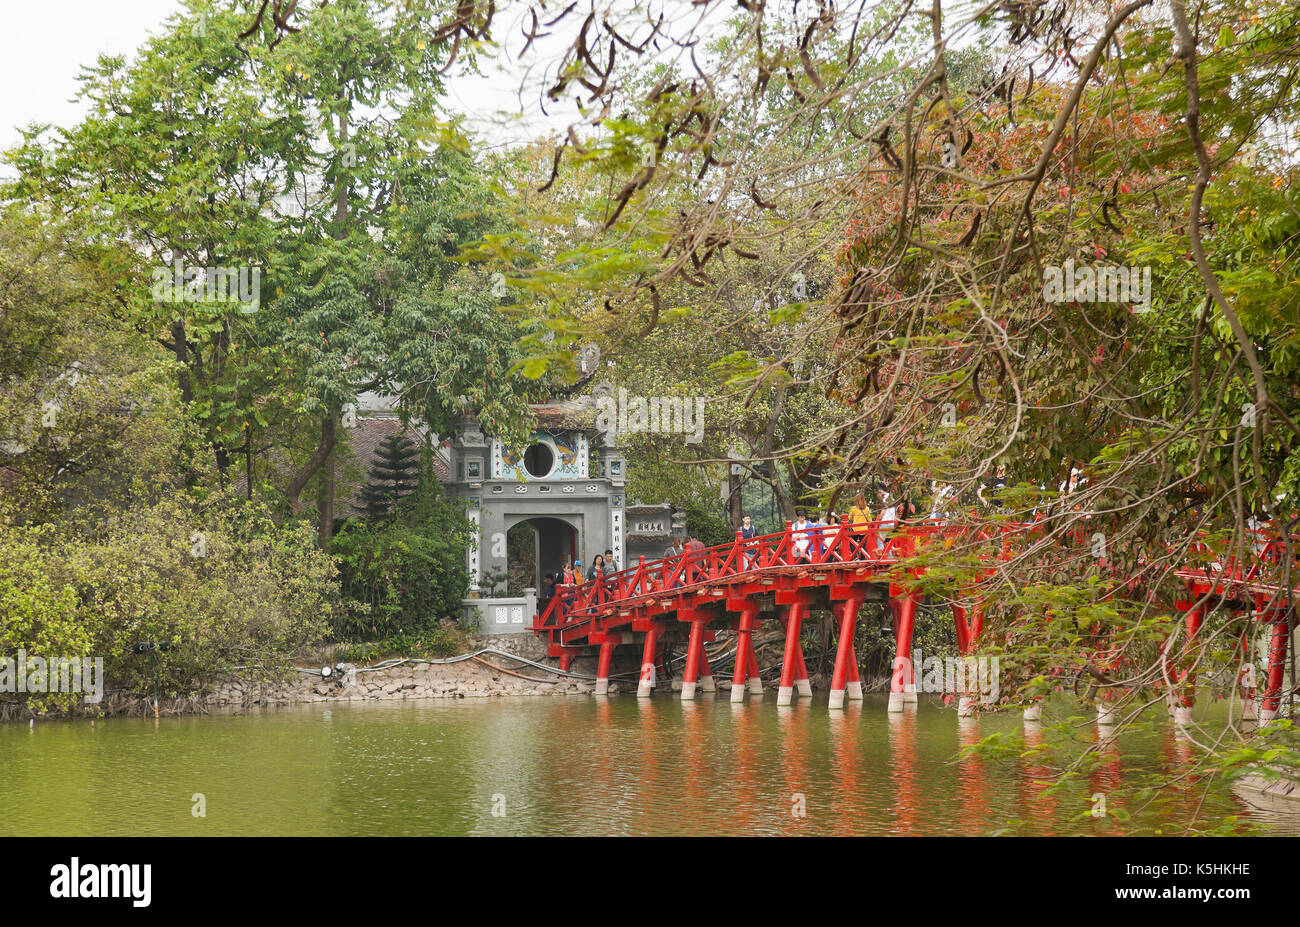 The Huc Bridge connects Jade Island on which the Temple of the Jade Mountain (Ngoc Son Temple) stands. Hoàn Kiếm Lake, Hanoi, Vietnam Stock Photo